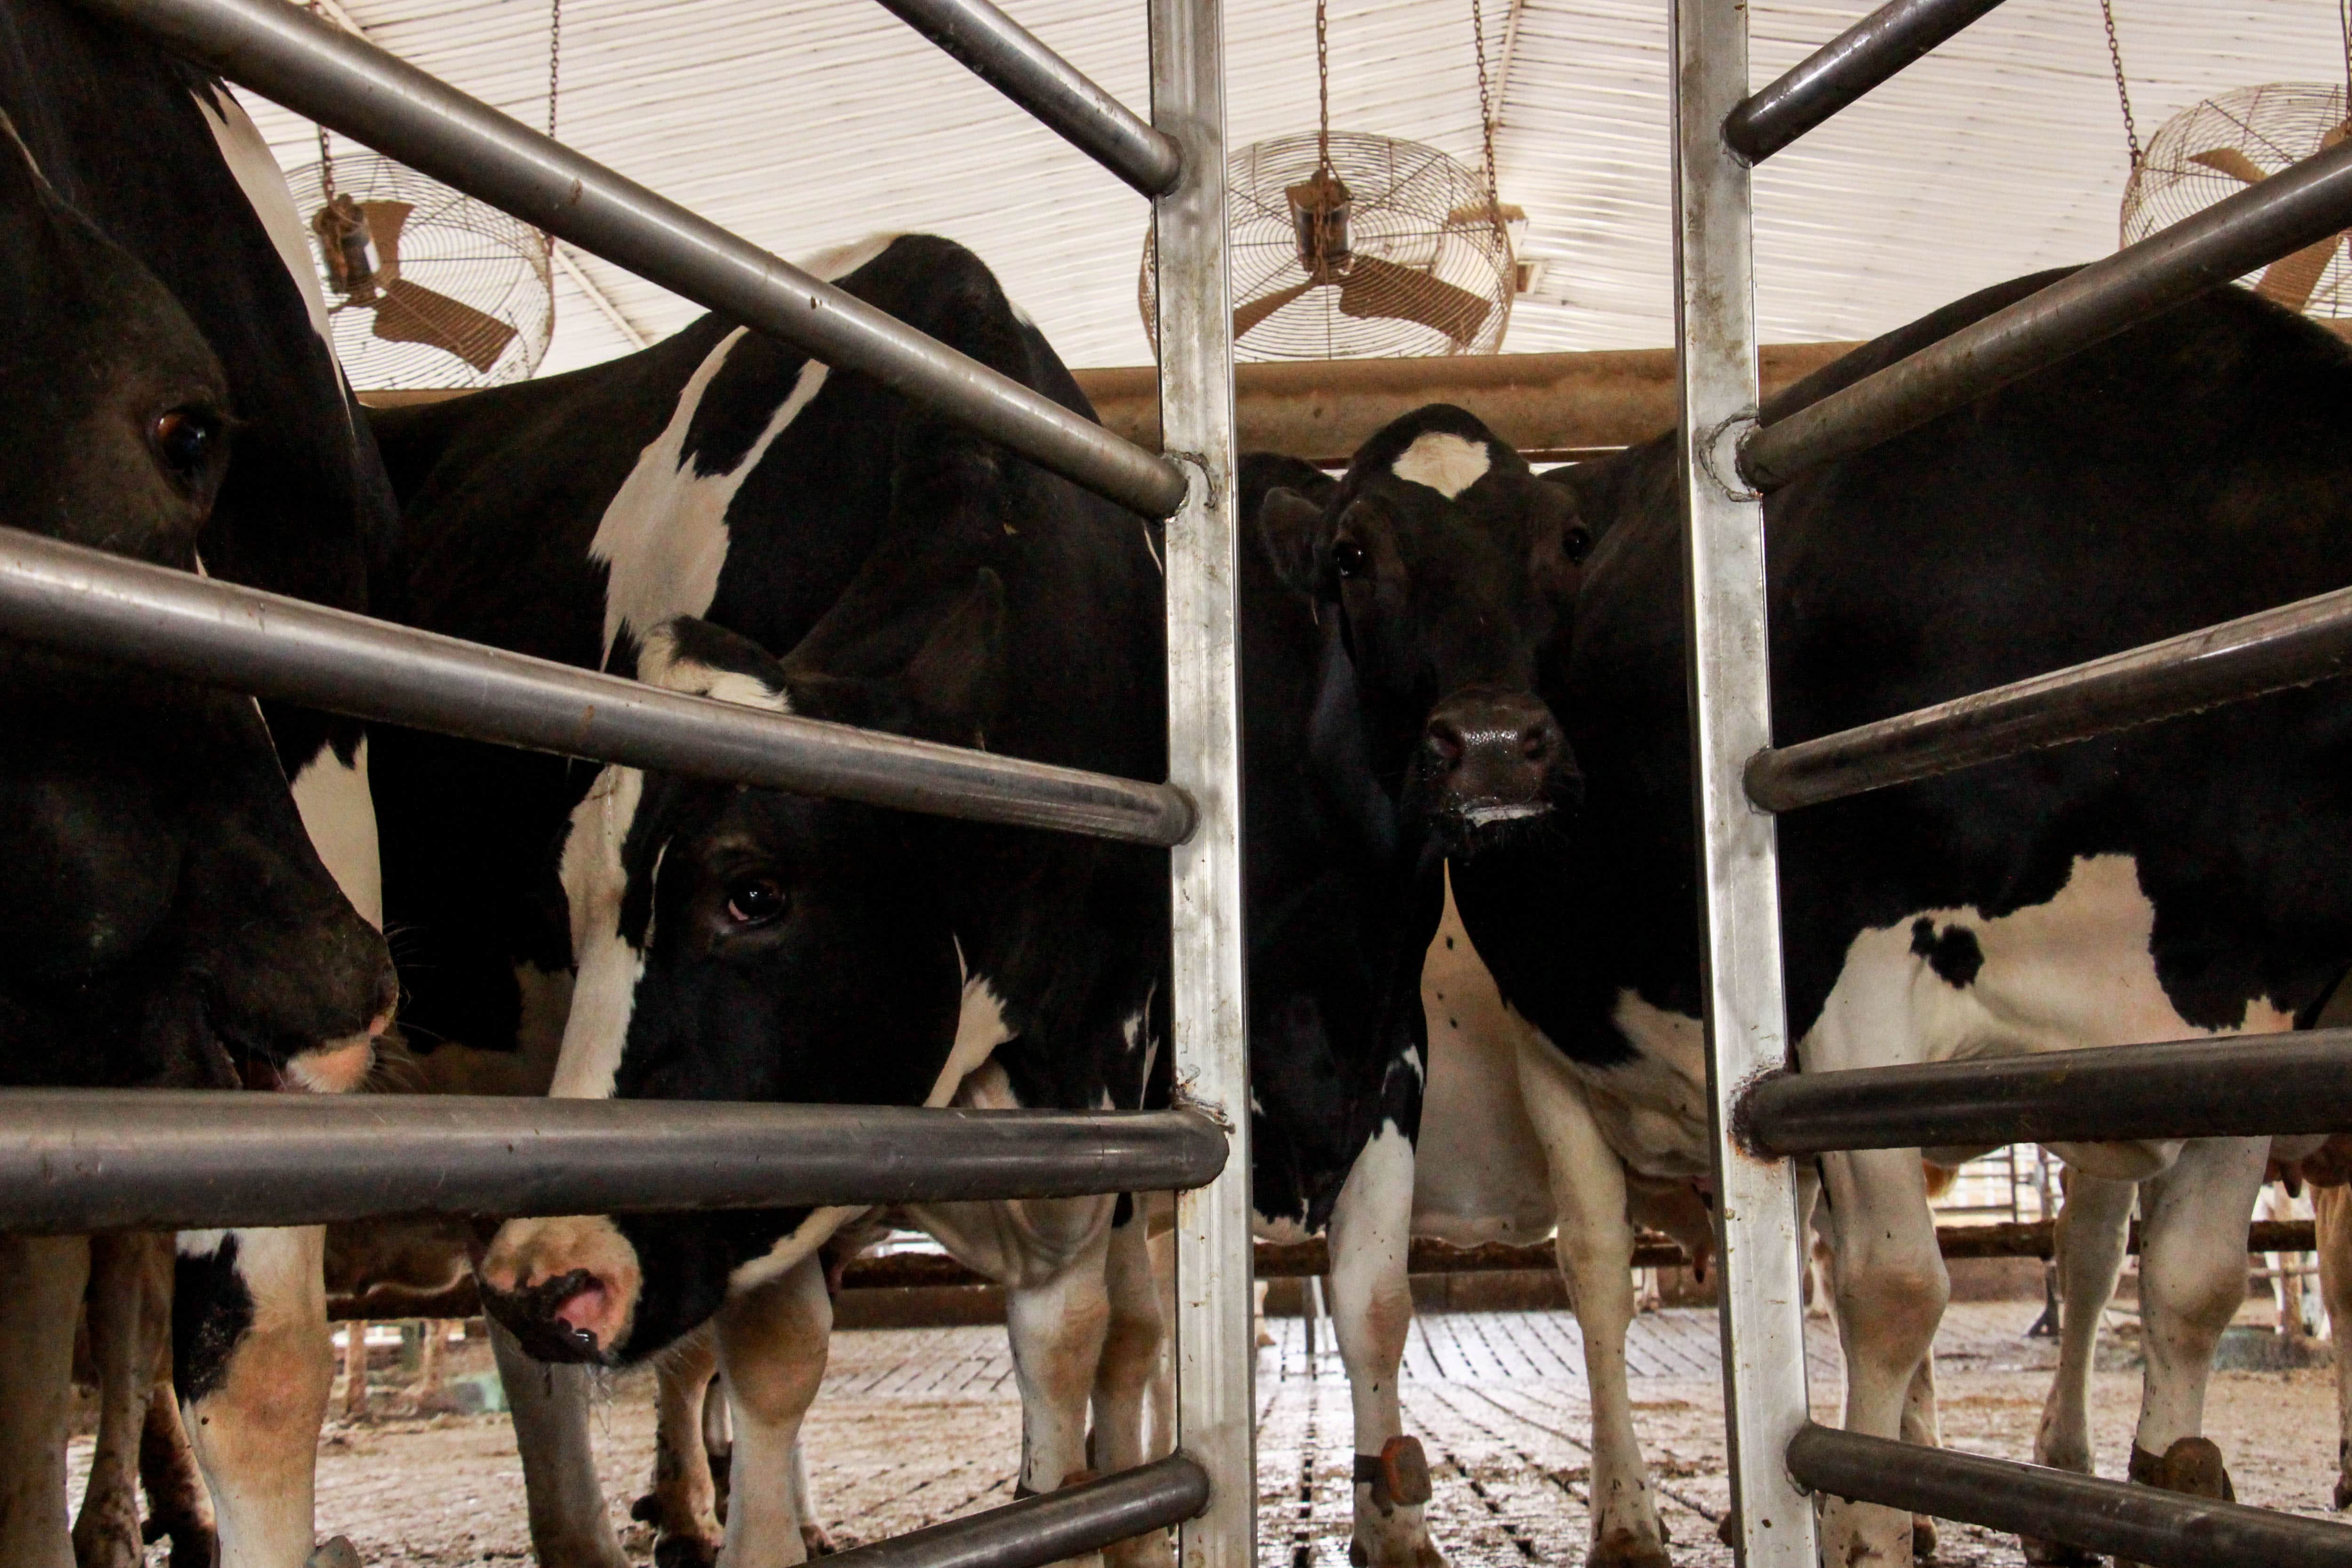 Cows at Loewith Farms in Lynden, Ontario, patiently wait before the farmers herd them to the robotic milking pumps for their afternoon milking session.